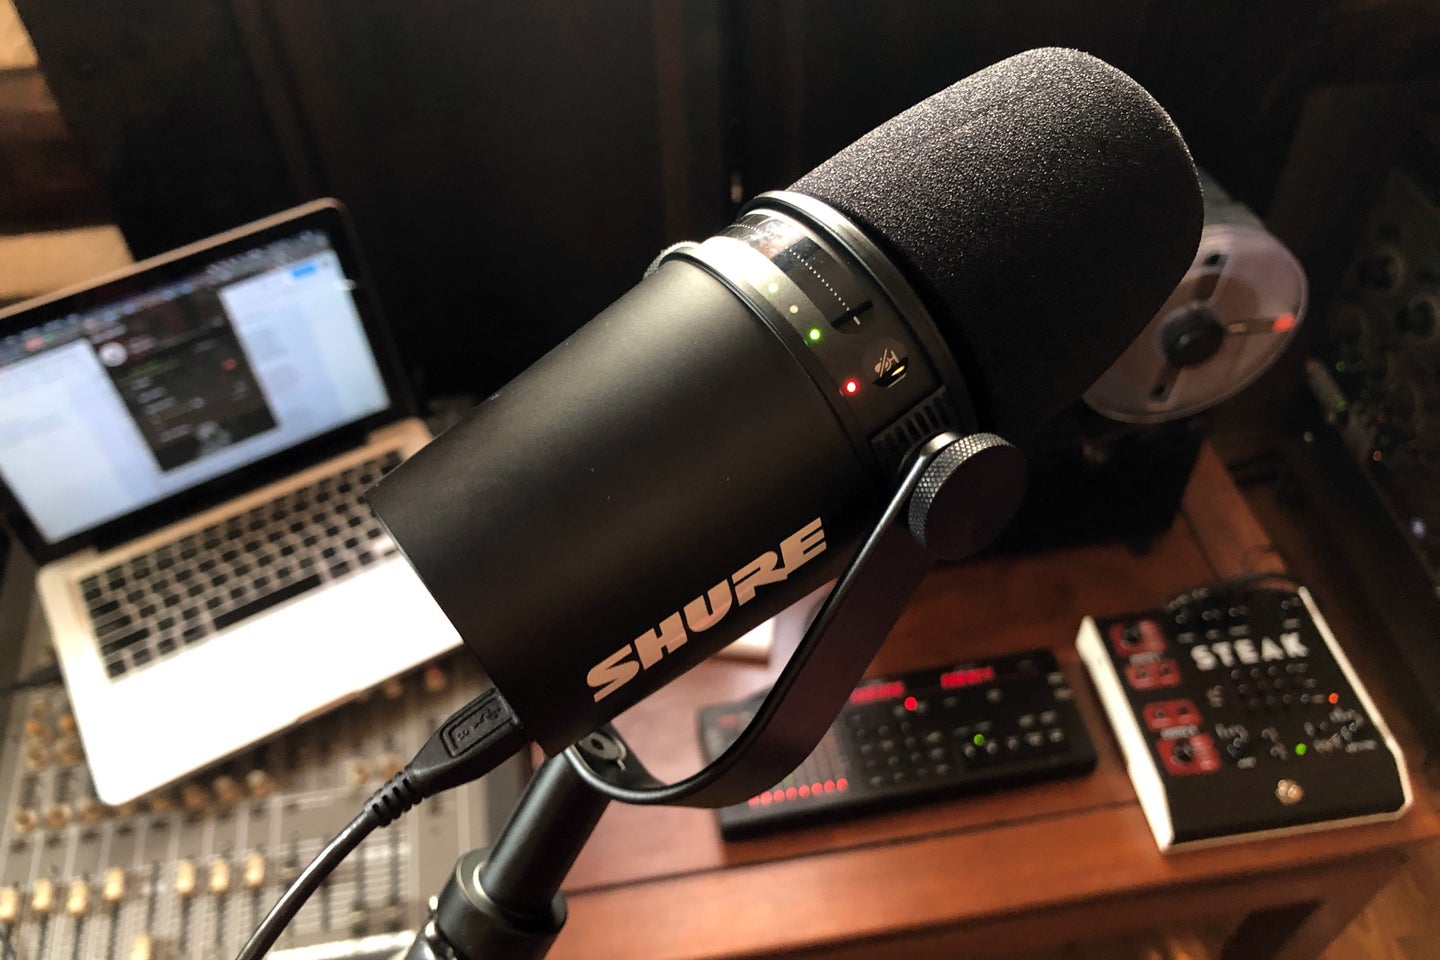 Shure MV7 podcasting microphone connected via USB